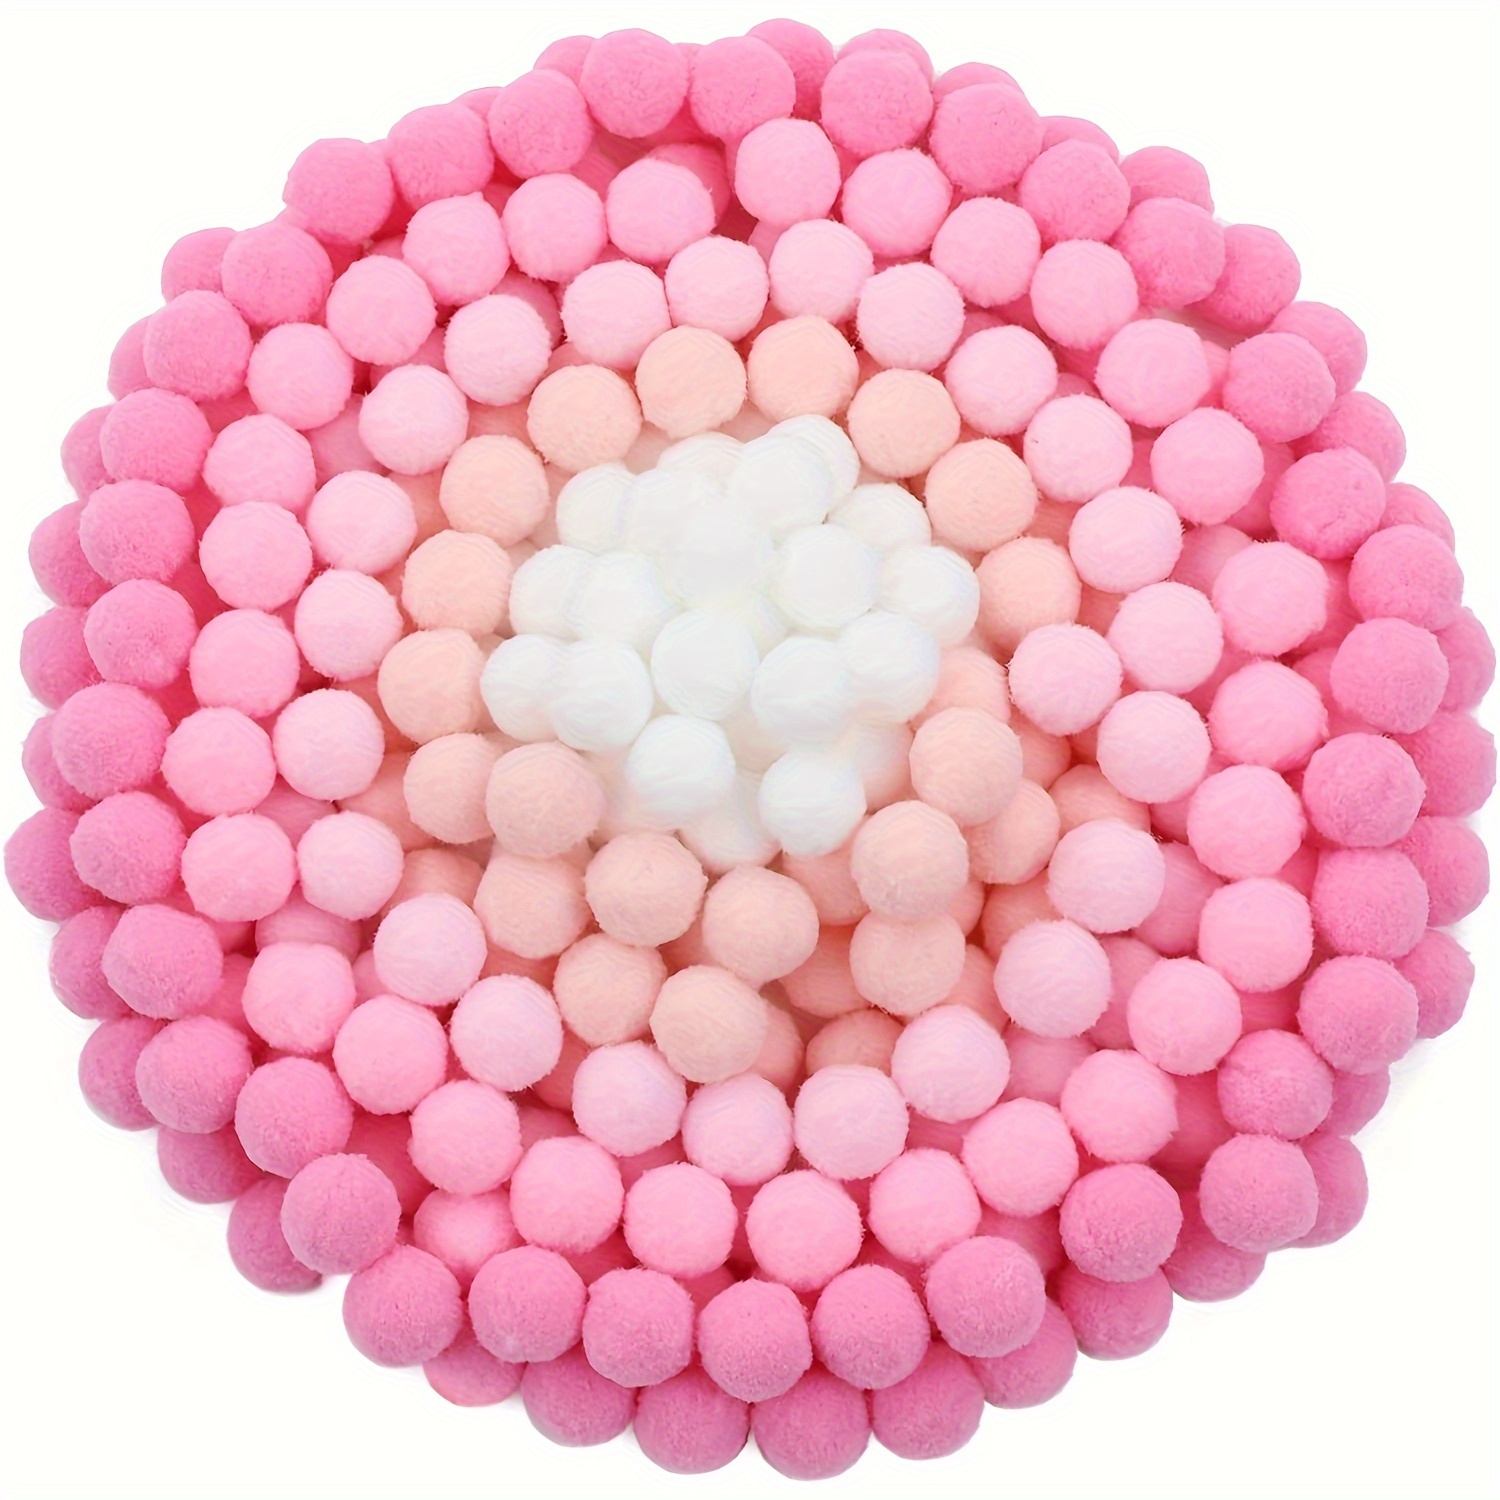 1Pack(1000PCS) Colorful Pom Poms for Crafts Craft Pom Pom Balls Mini  Pompoms for Crafts Tiny Pom Pom for for DIY Art Creative Crafts Decorations